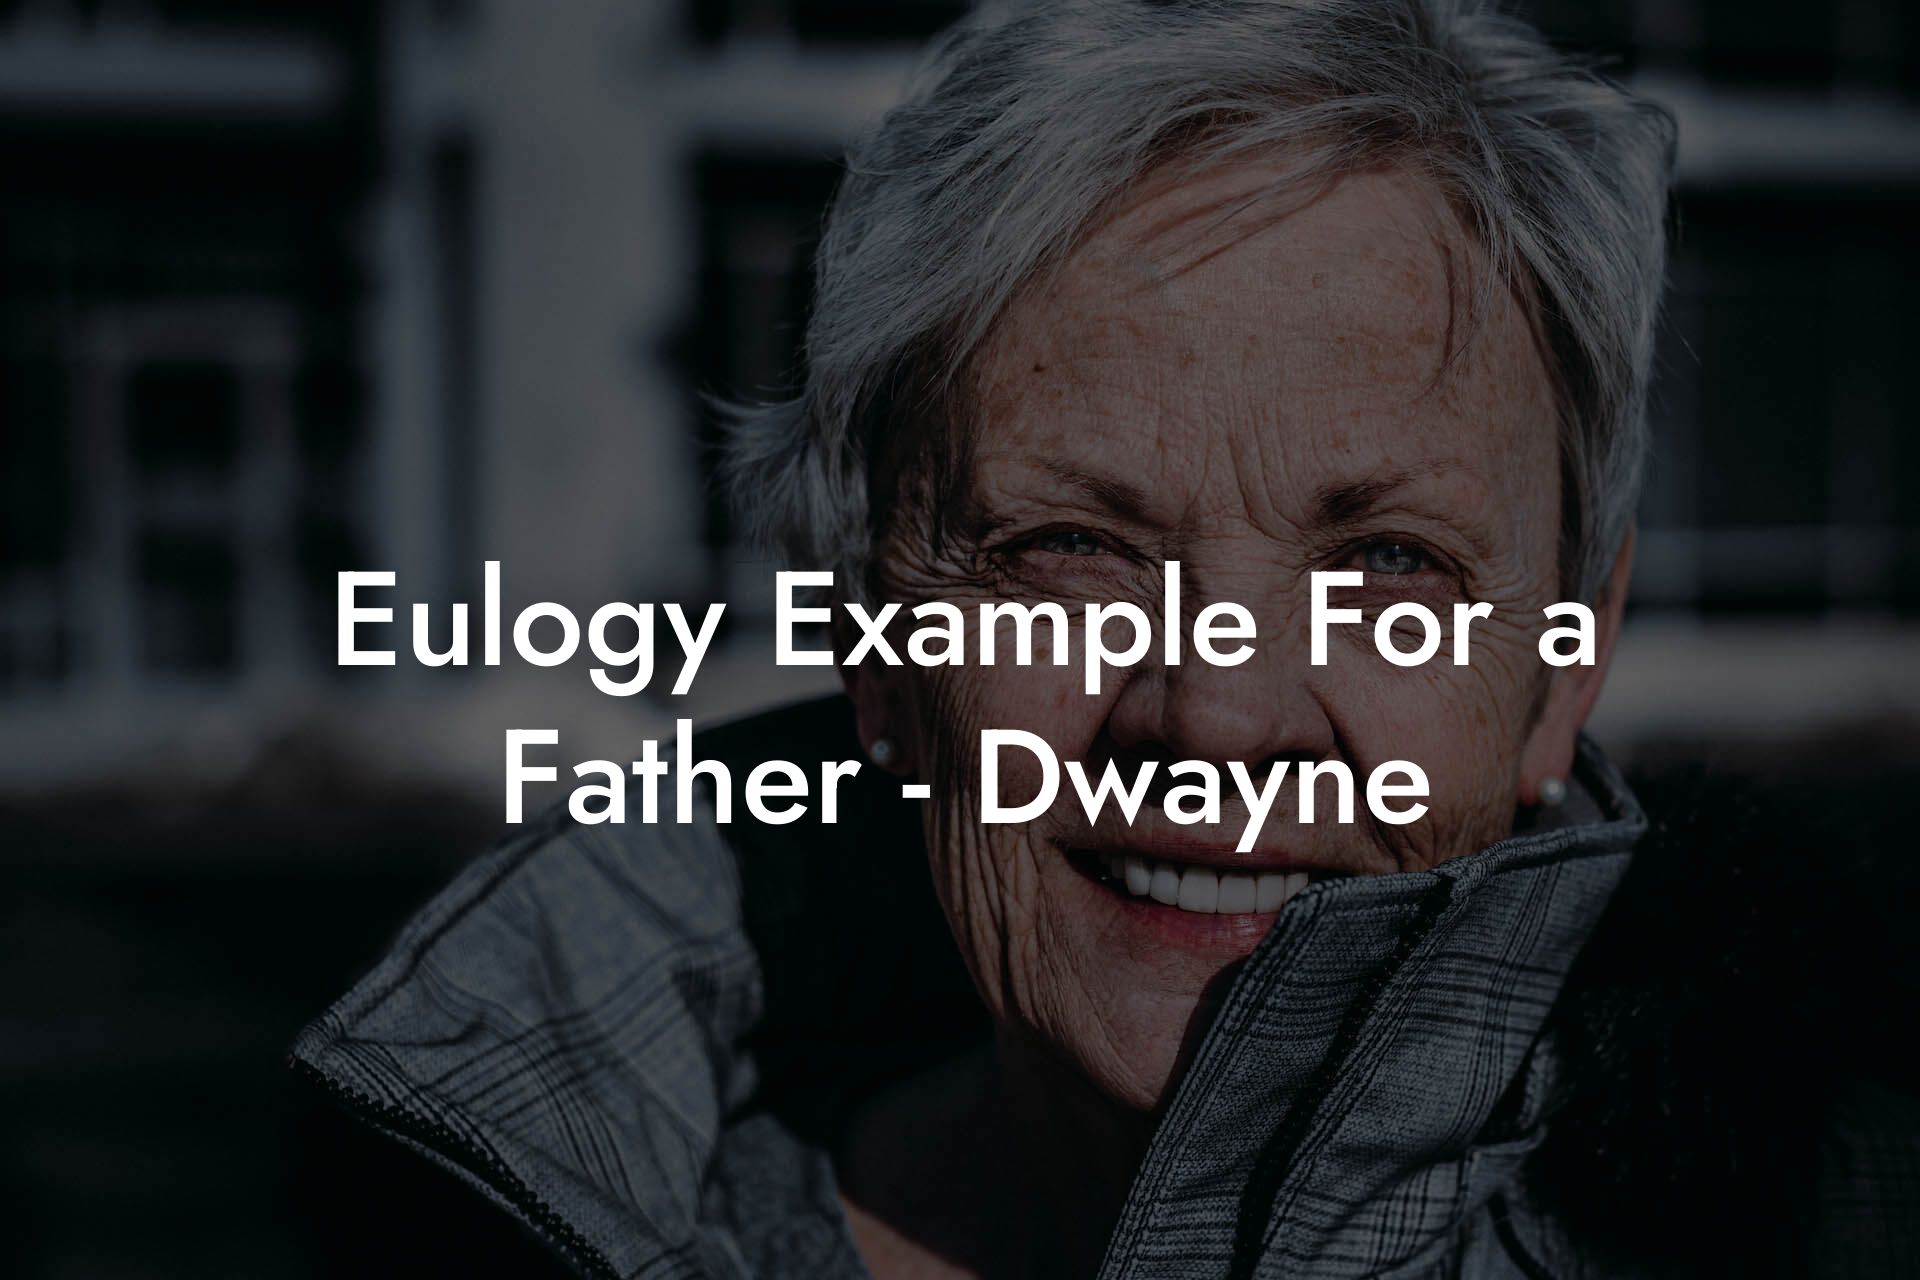 Eulogy Example For a Father - Dwayne